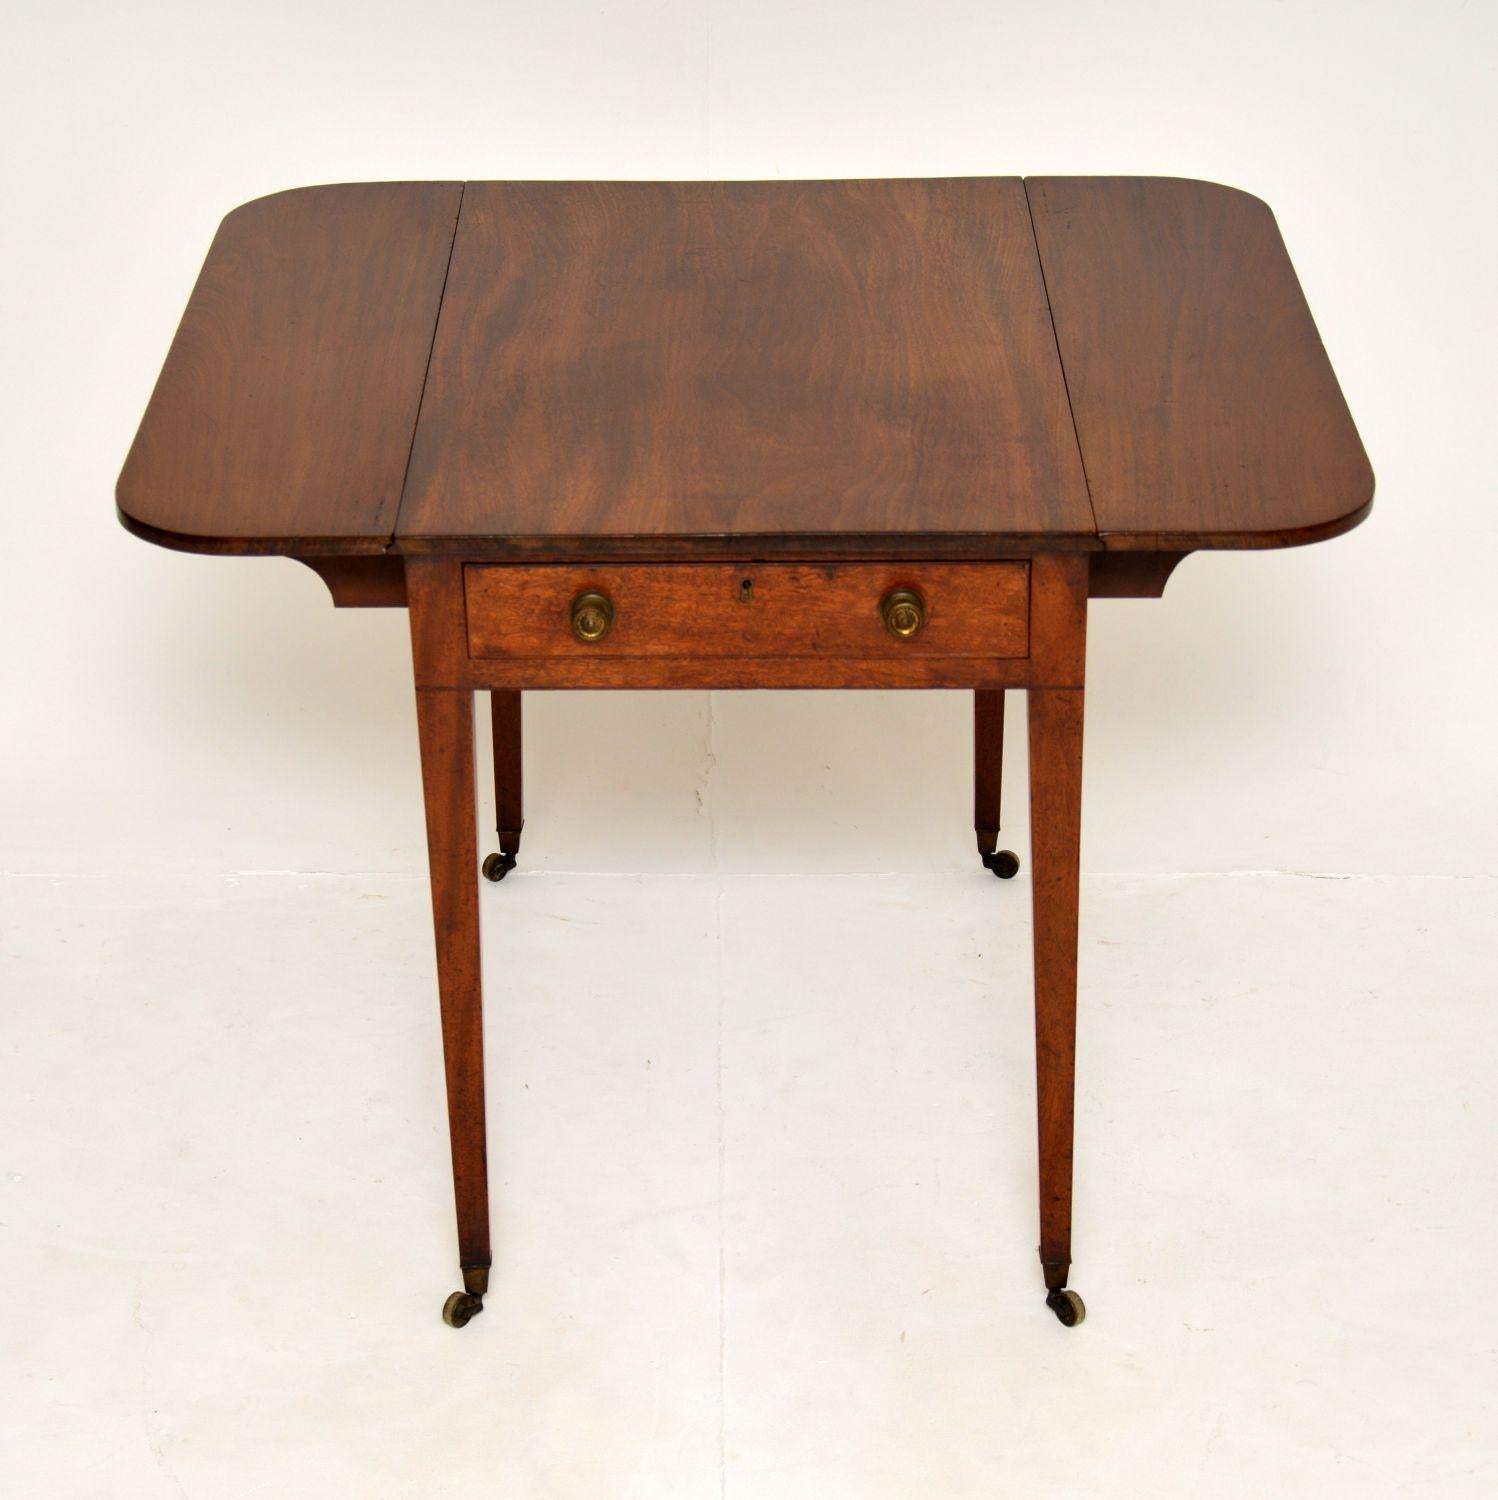 An elegant and very well made Georgian period Pembroke table. This was made in England, it dates from around 1790-1810 period.

The quality is superb, this is constructed from solid wood which has acquired a gorgeous patina over the years. There are